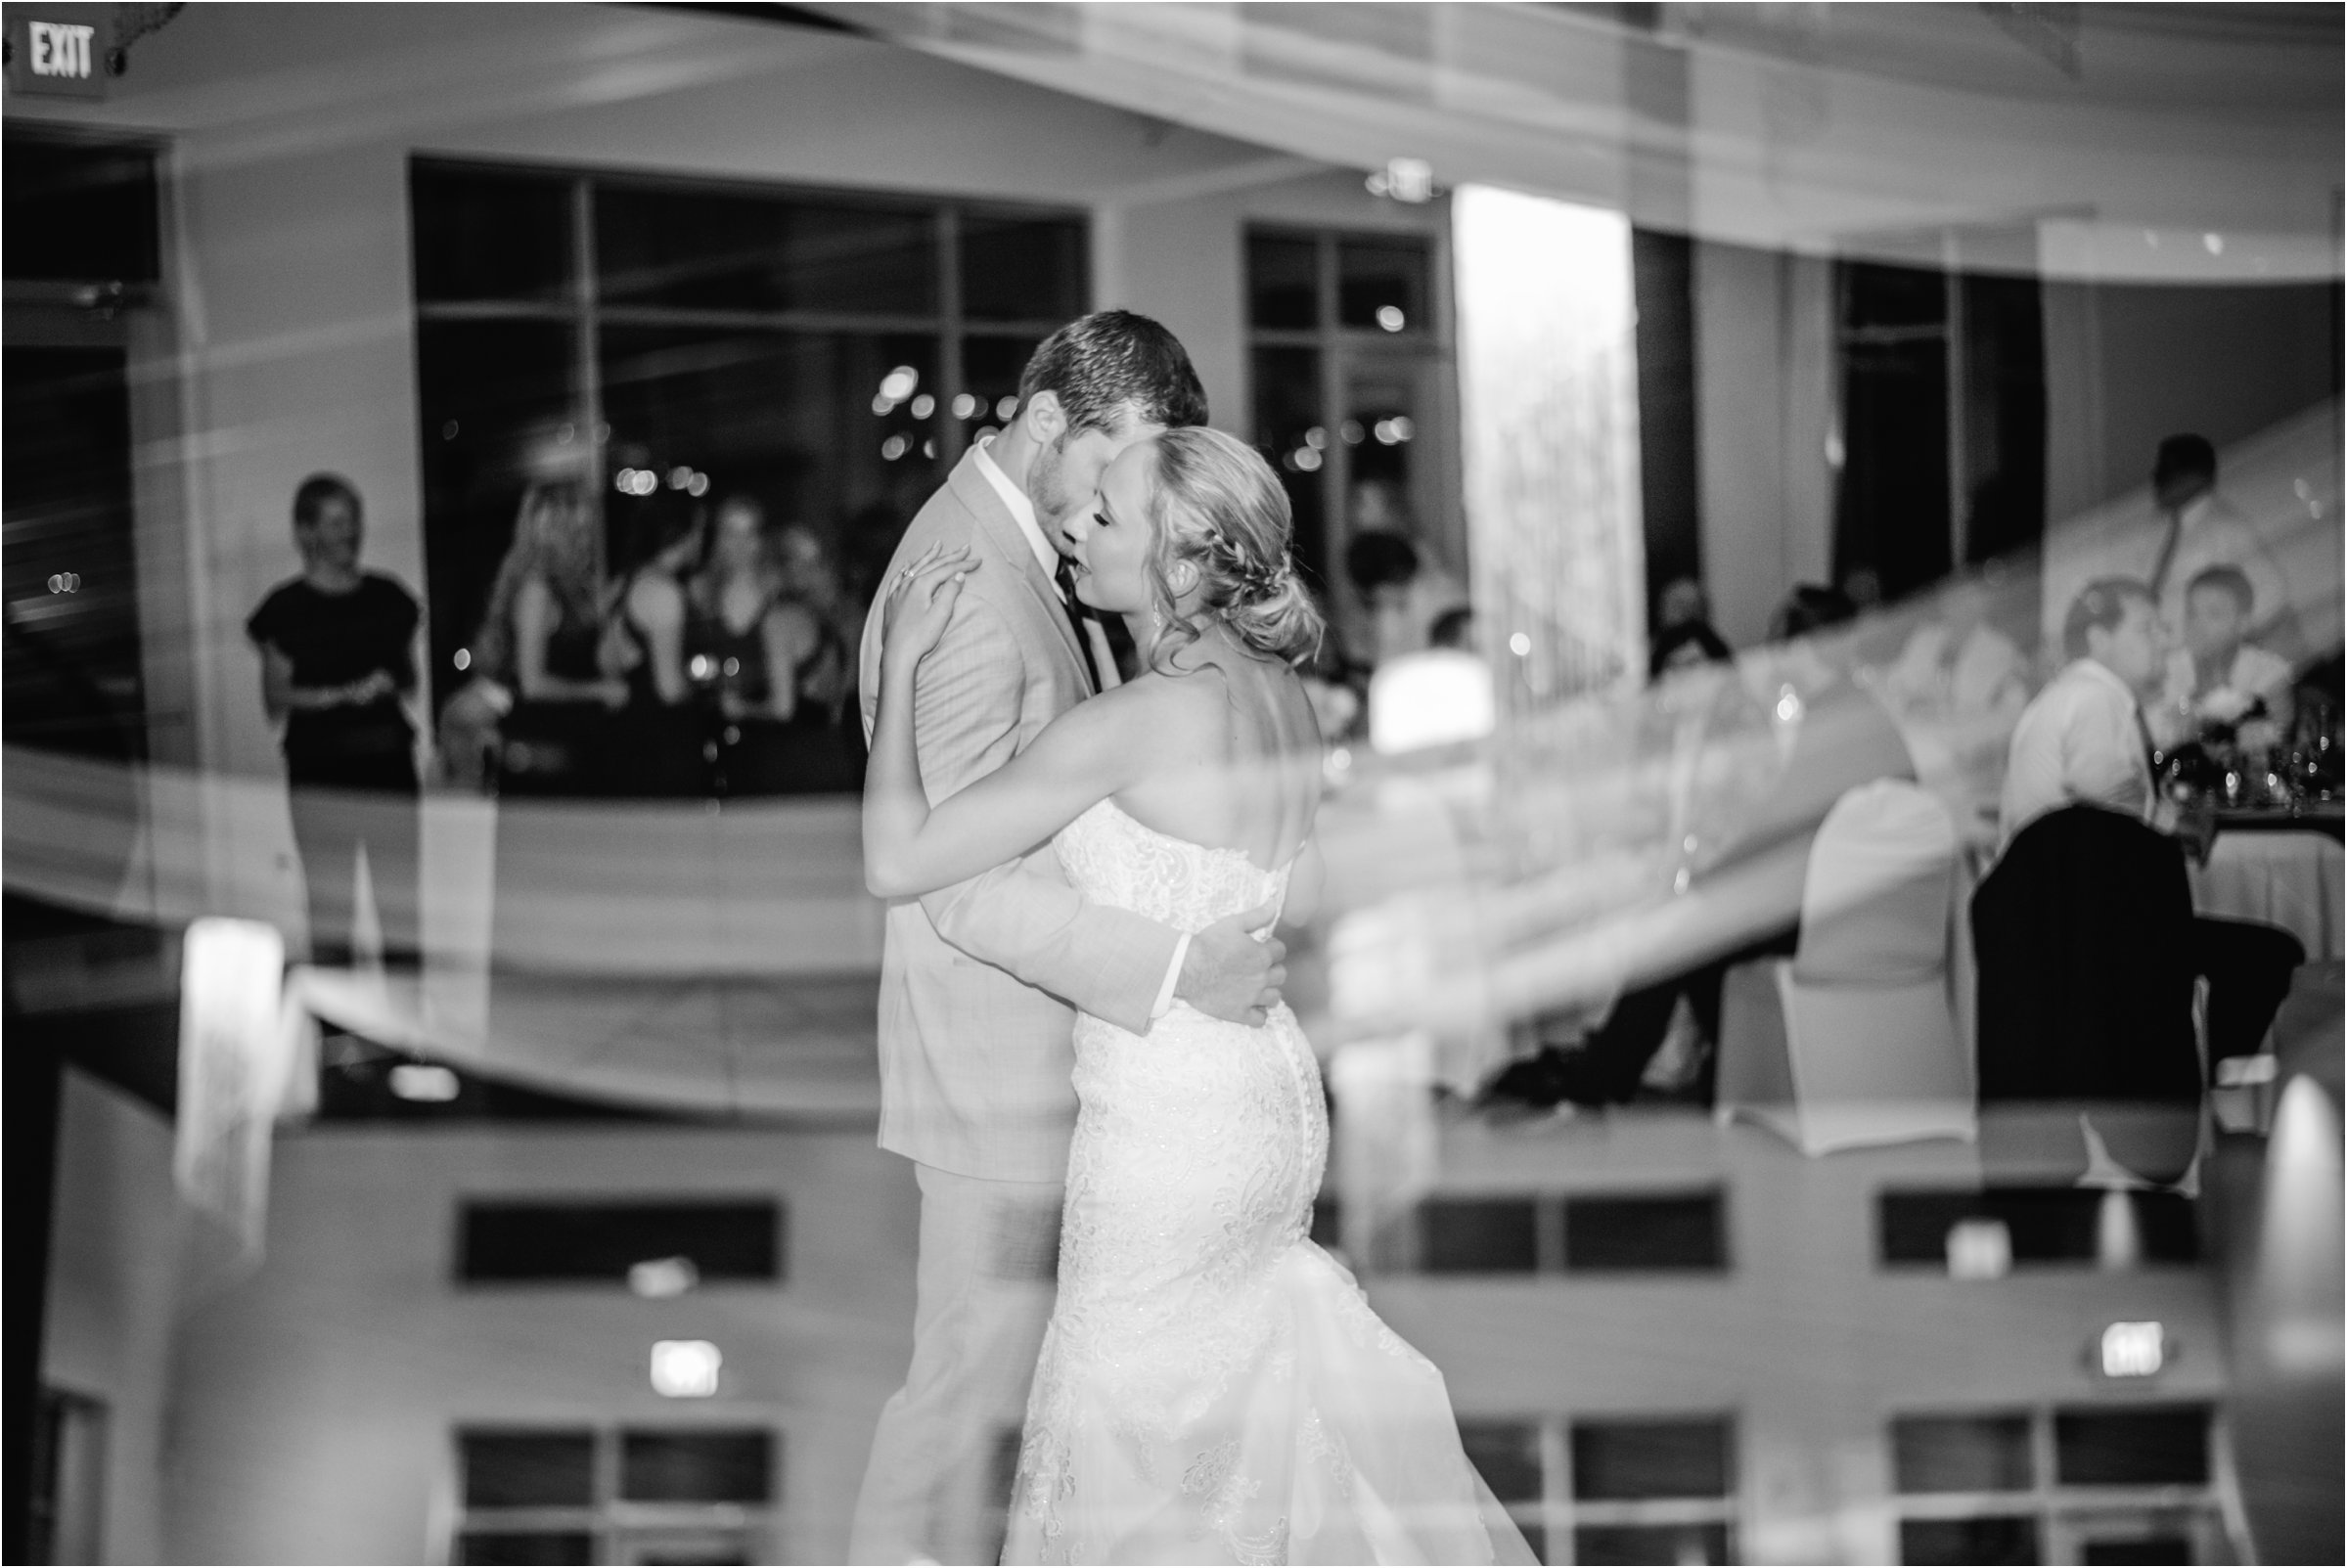 bride and groom dancing alone together on the dance floor with a double exposure of drapes